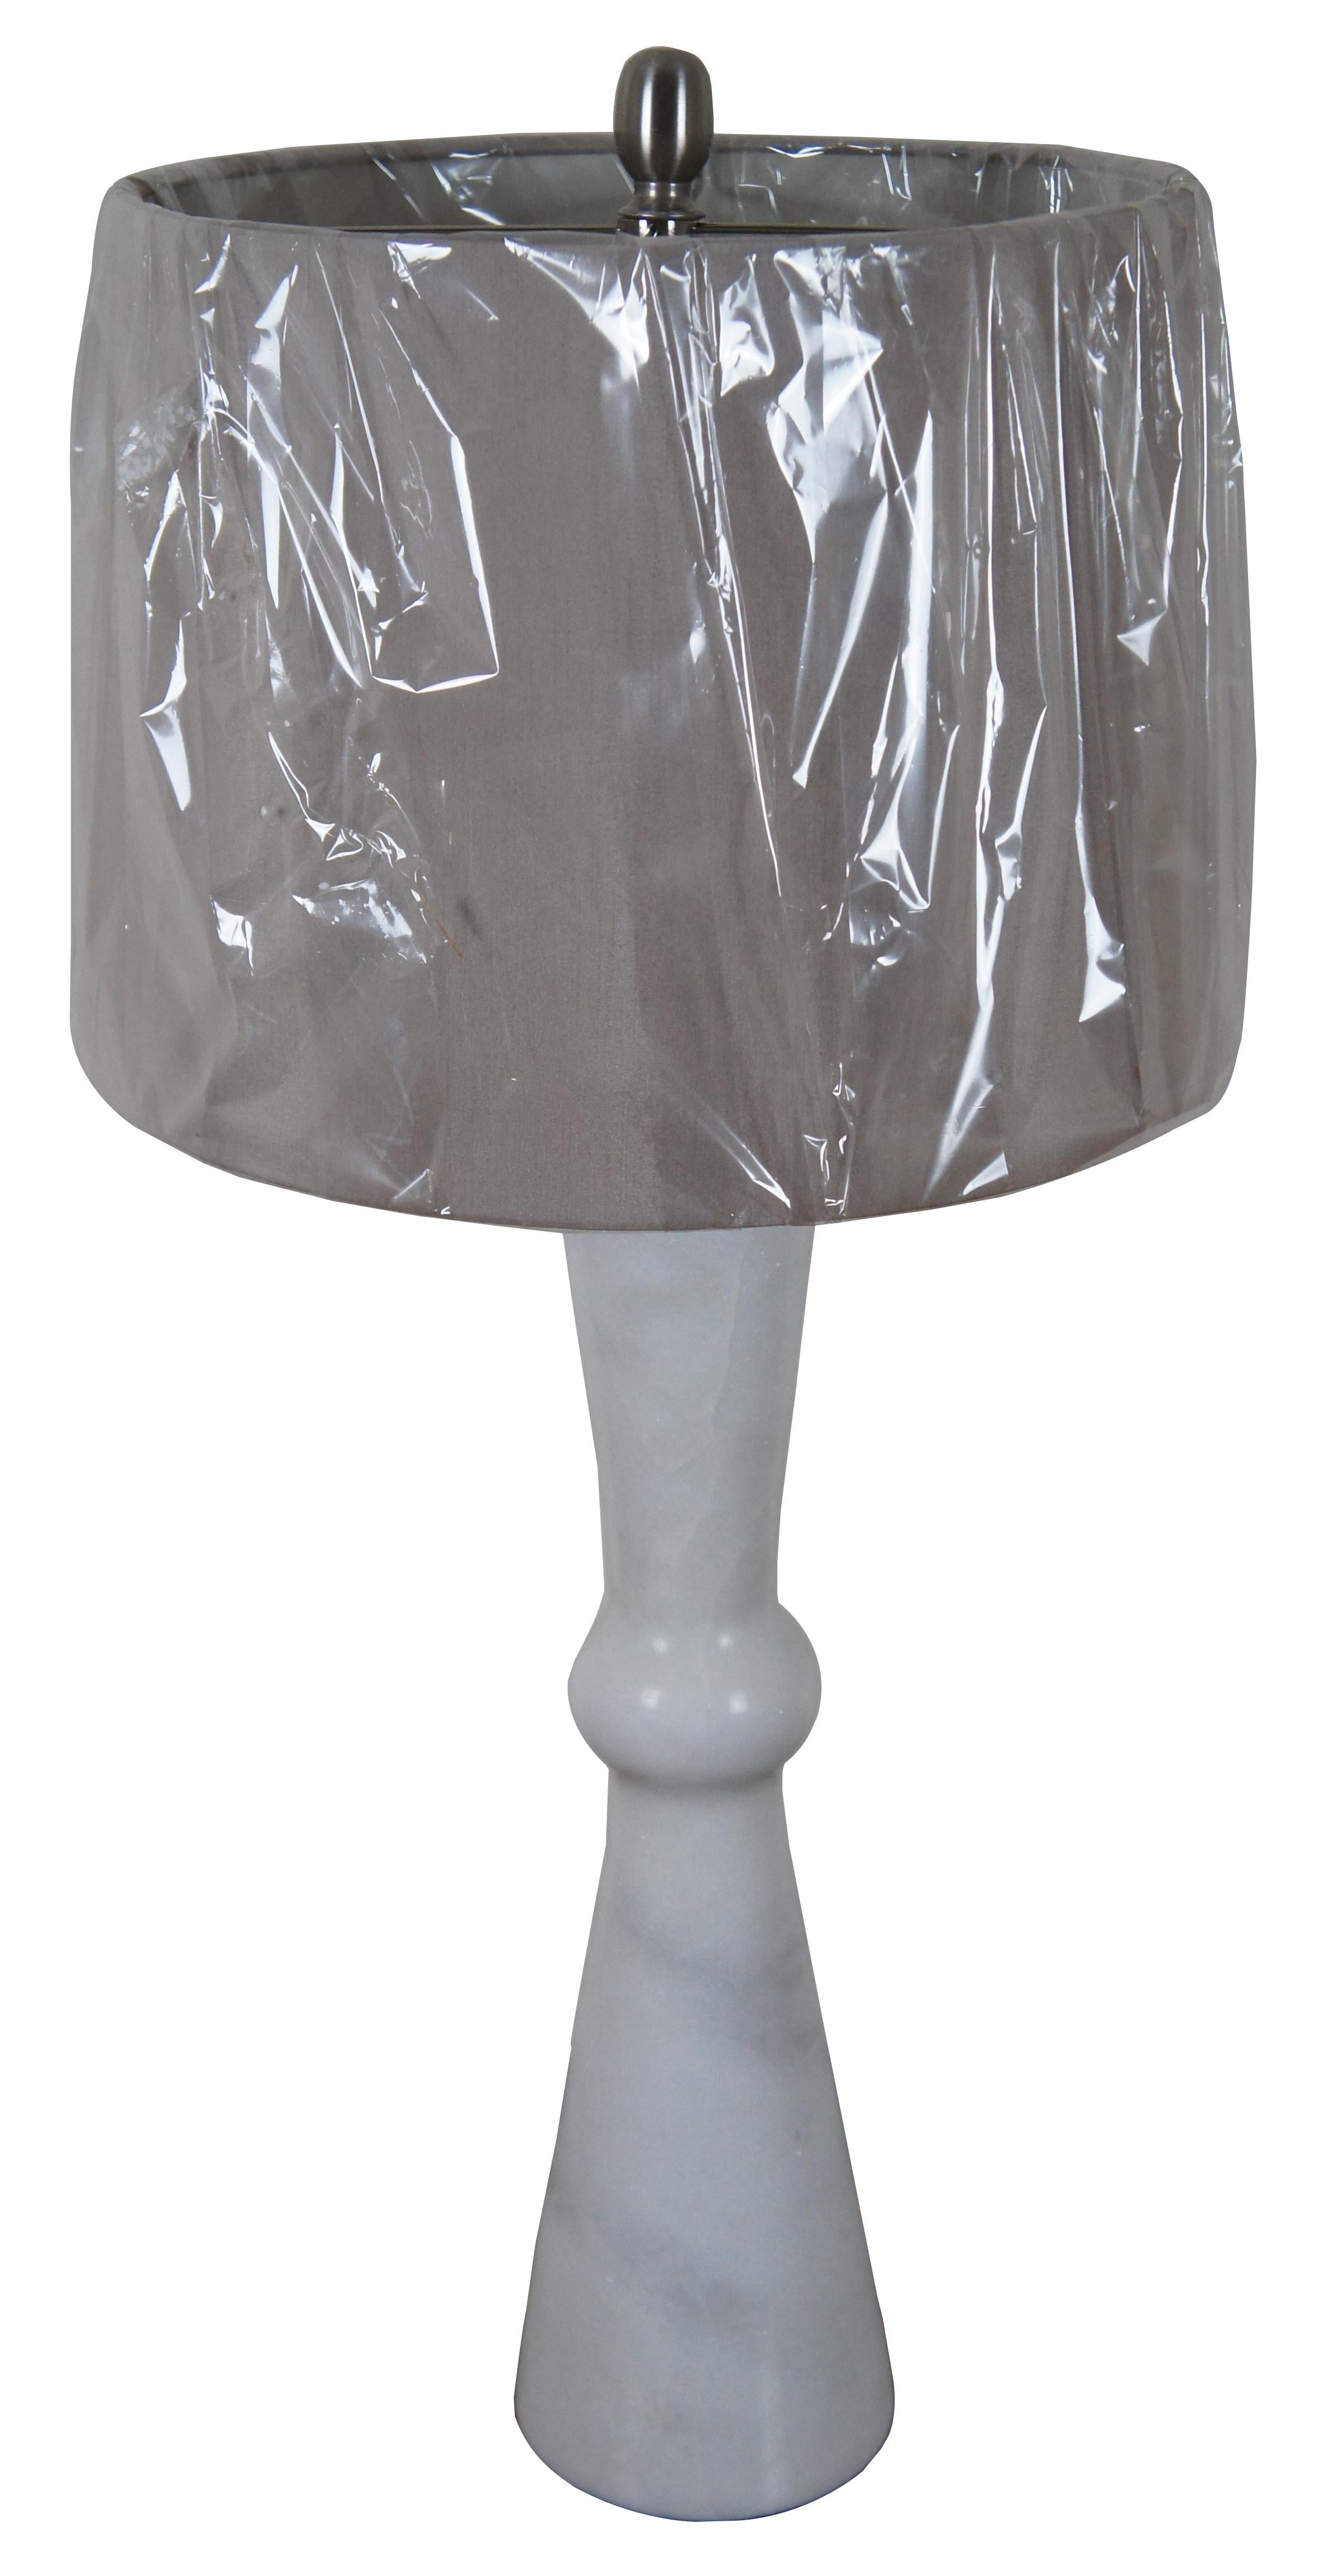 Elegant white marble table lamp featuring an hourglass / bowtie or scroll shaped column or pillar with the ends tapering to a rounded center; includes a taupe drum shade. Very Heavy. TL31568TJX

Measures: 5.75” x 26” / Shade - 15” x 11” / Total